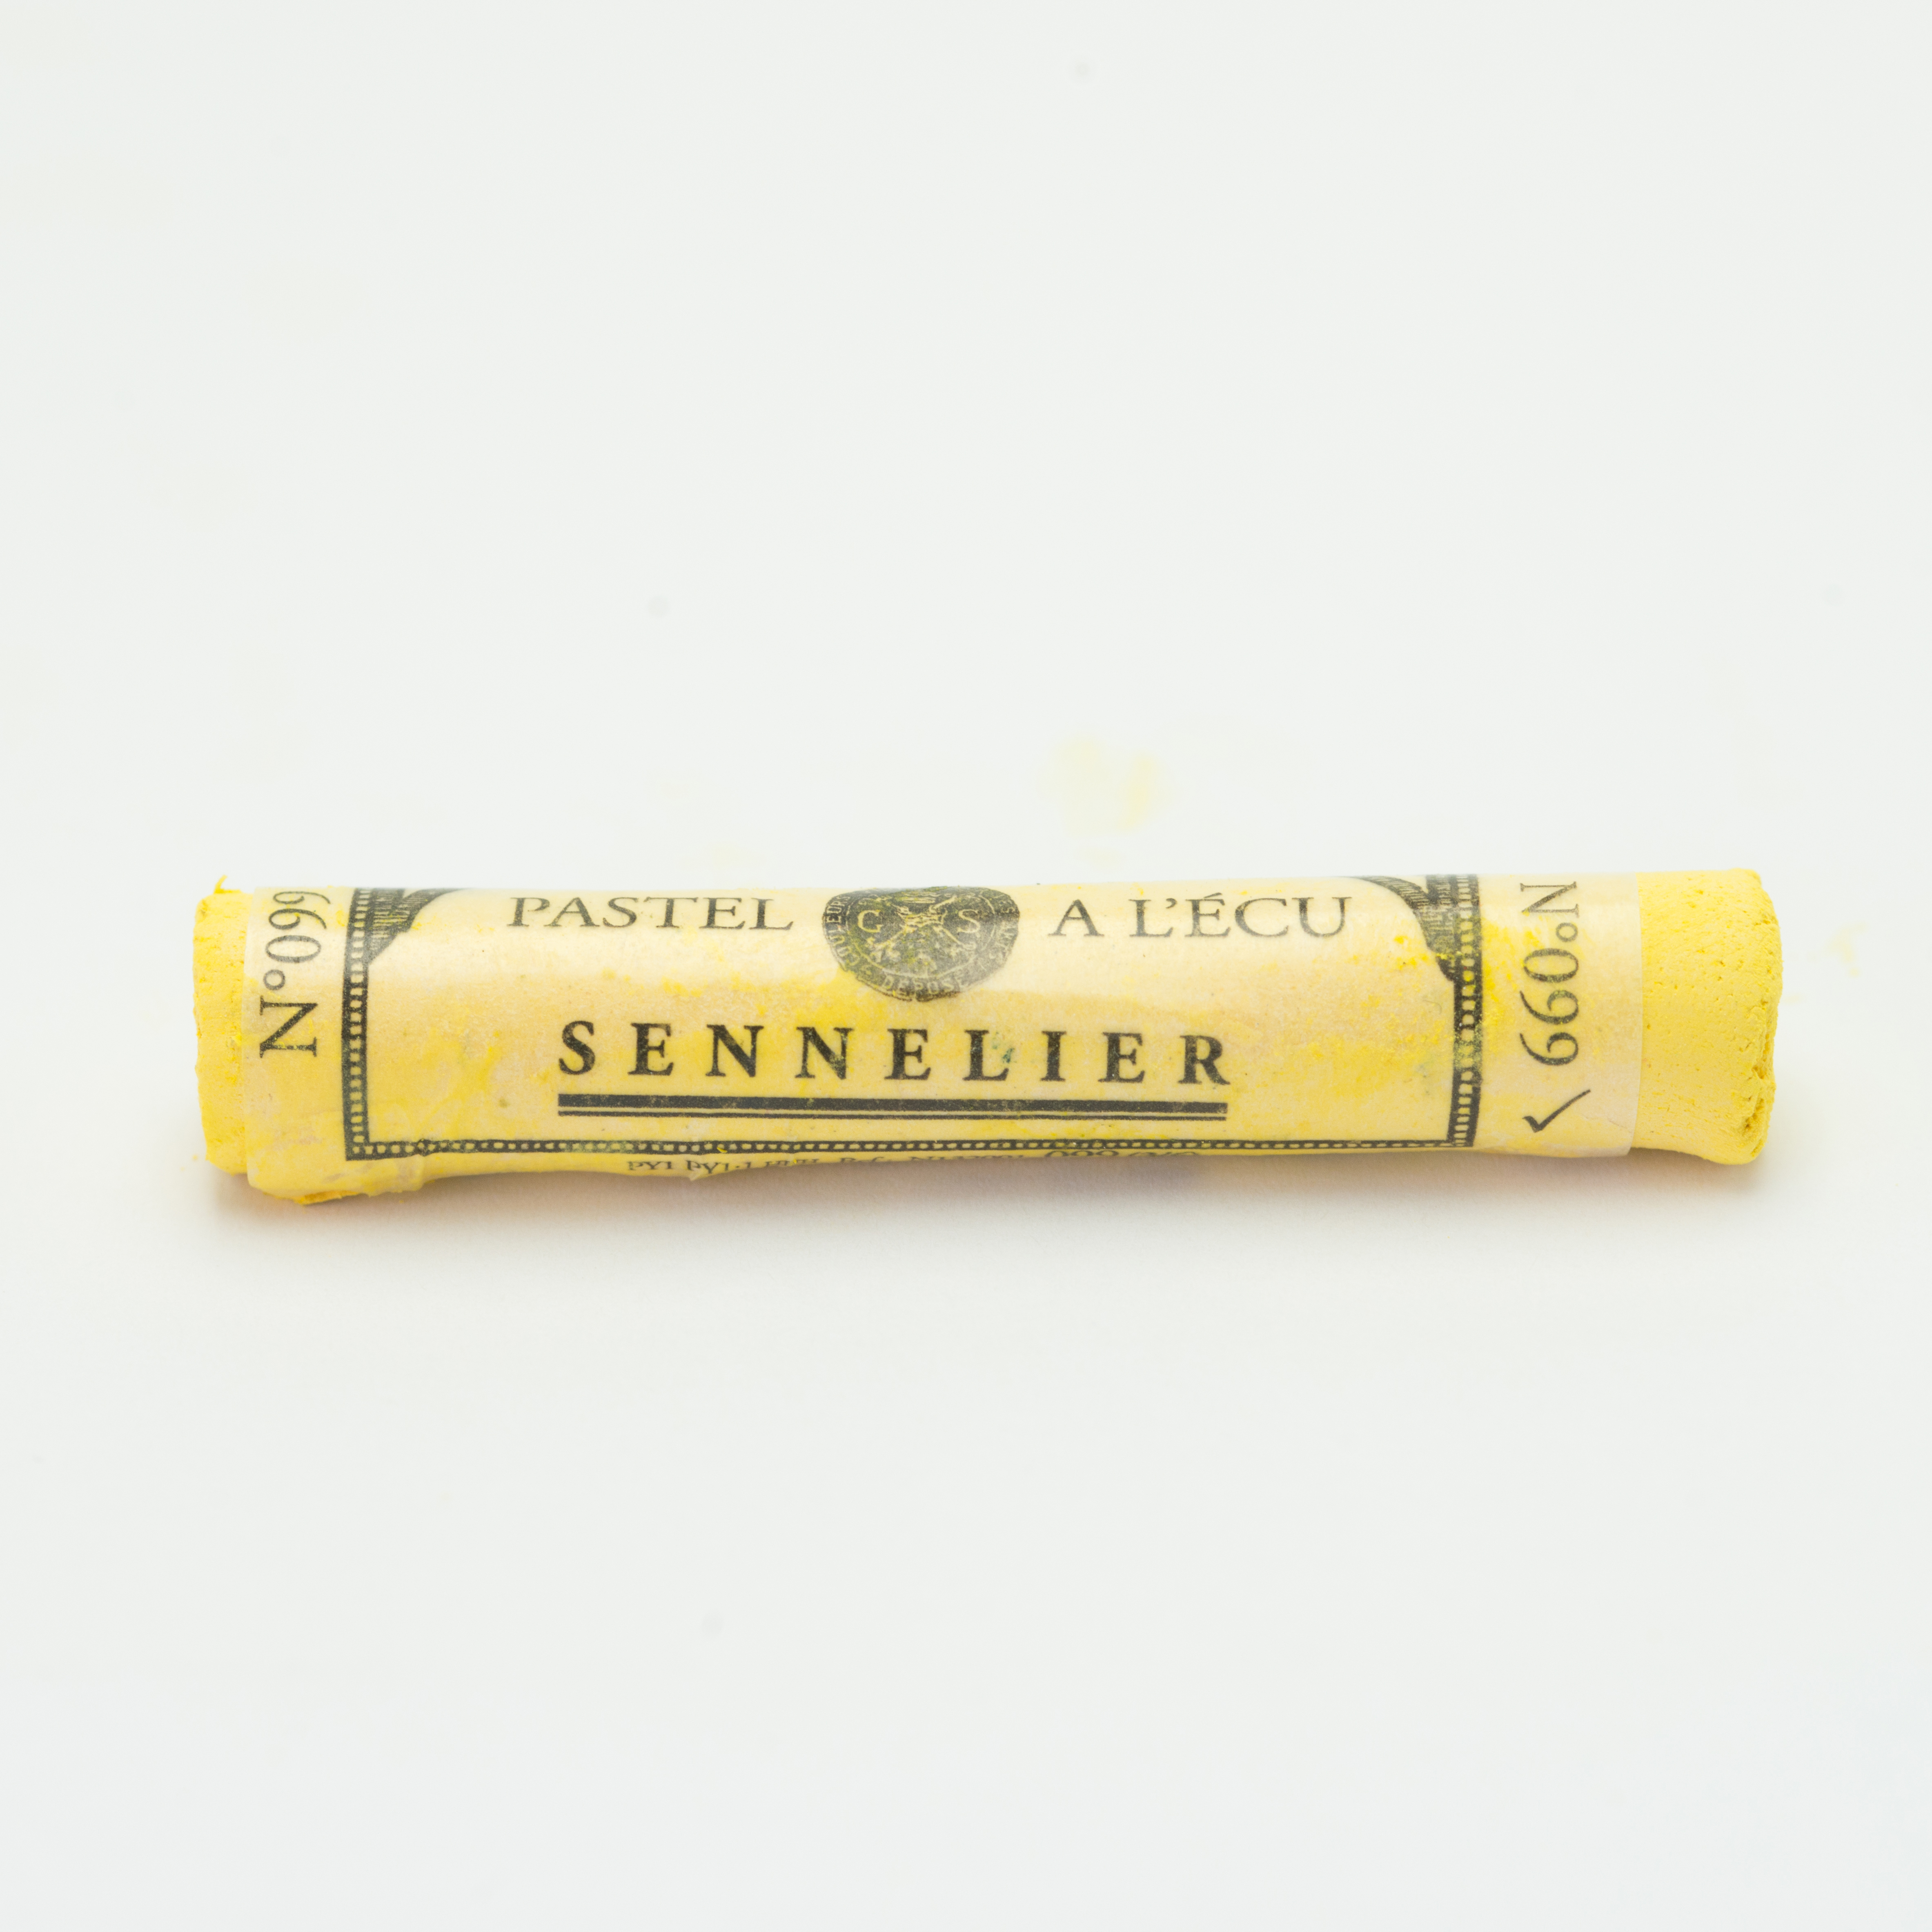 Sennelier Extra Soft Pastels - Naples Yellow 99